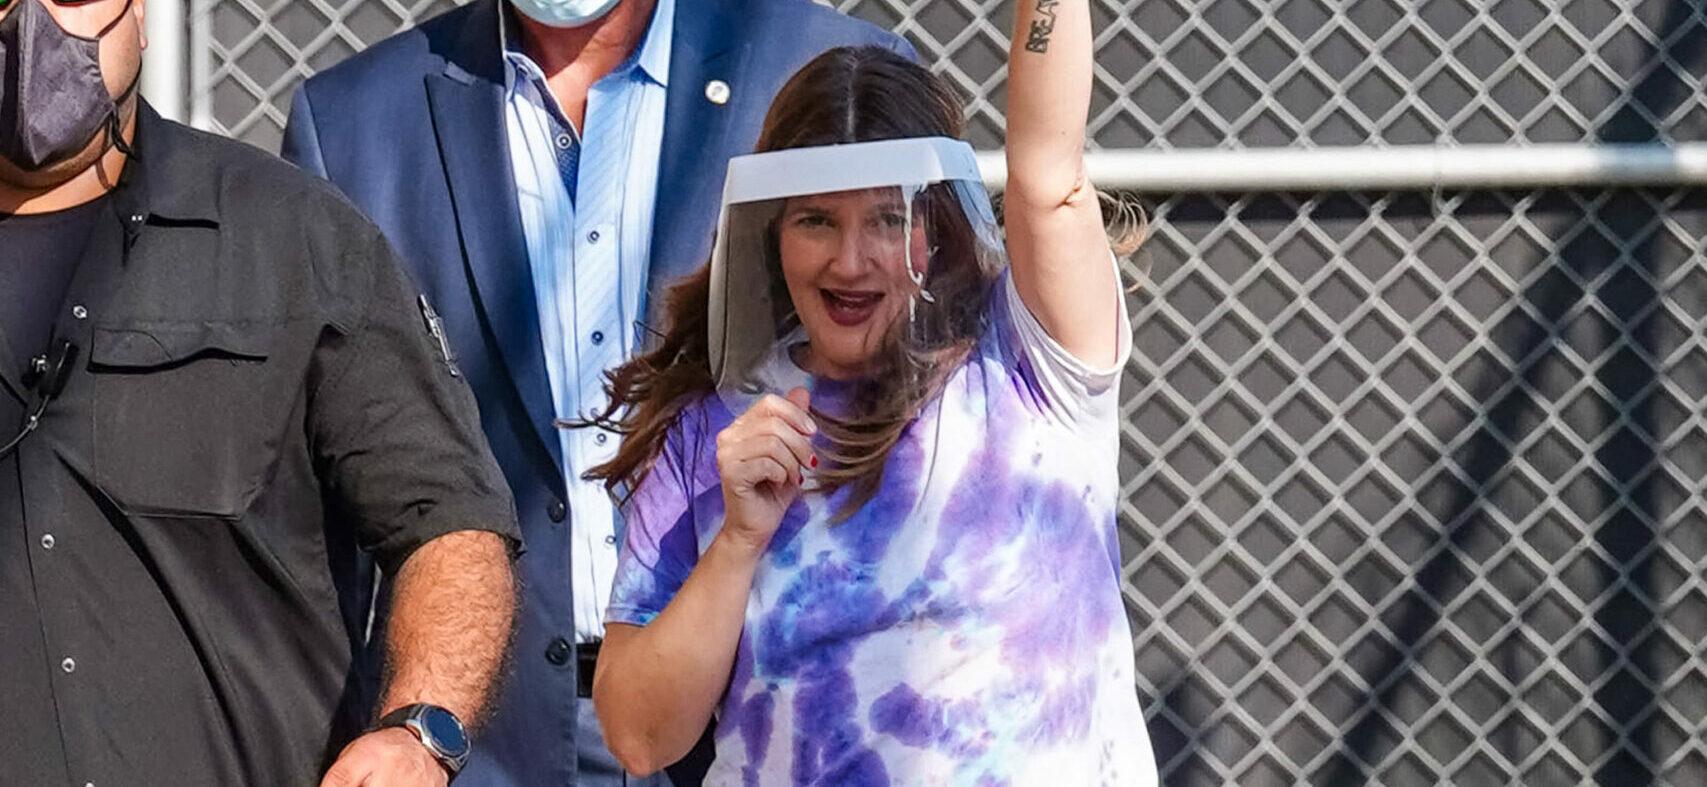 Drew Barrymore arriving at apos Jimmy Kimmel Live apos